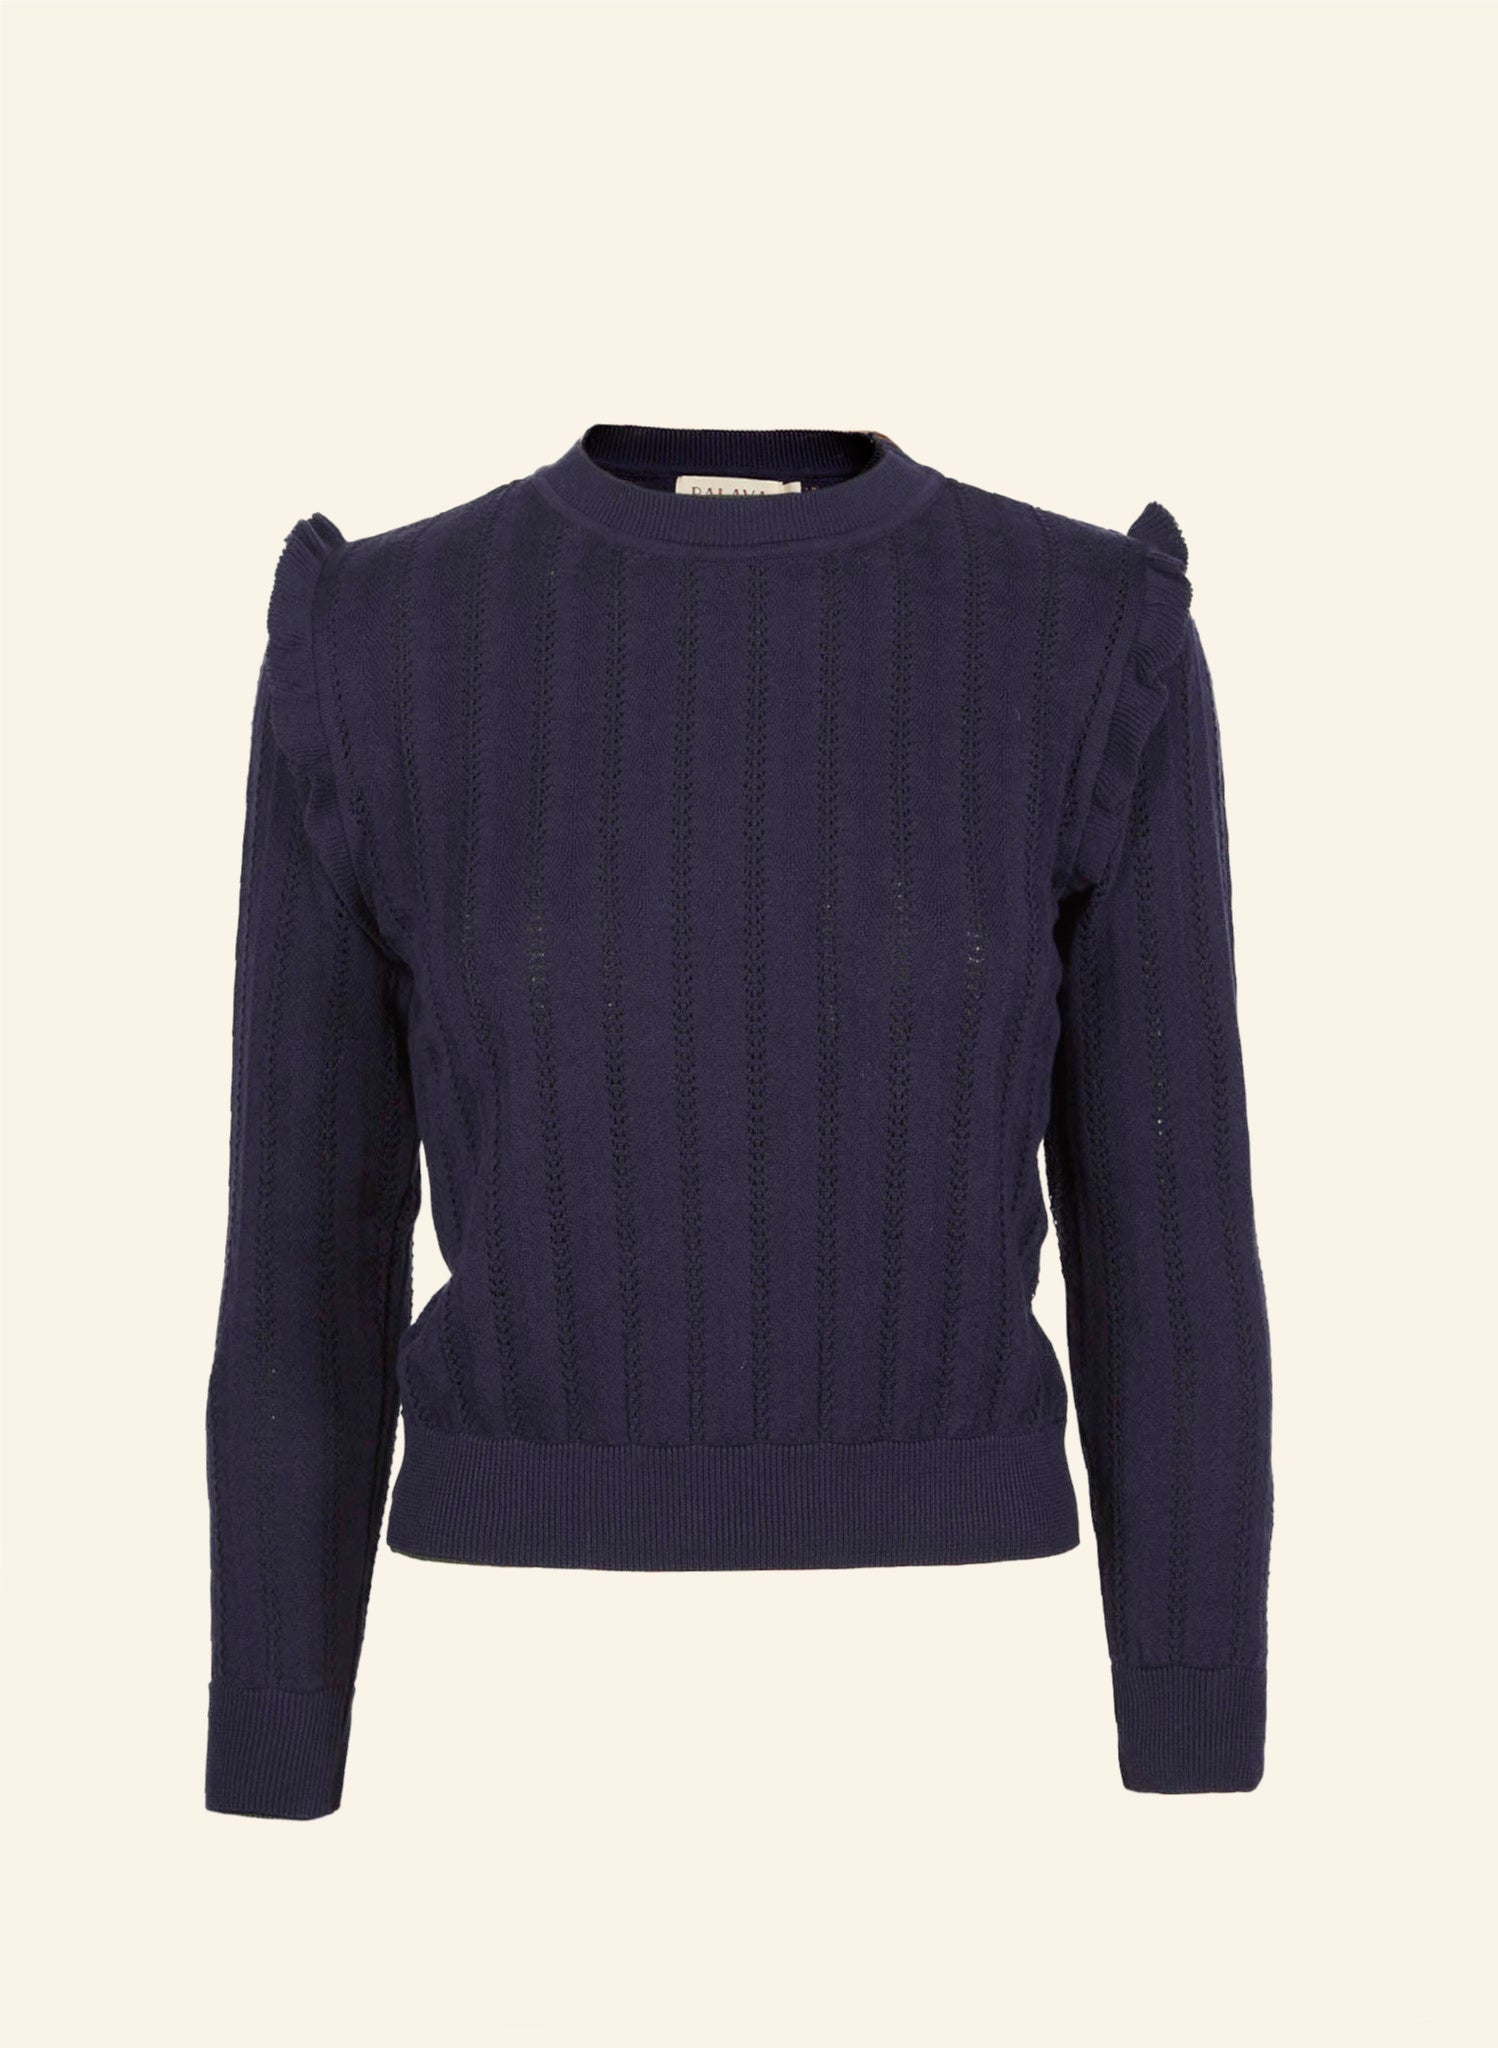 Diana - Navy Ruffle Knitted Top